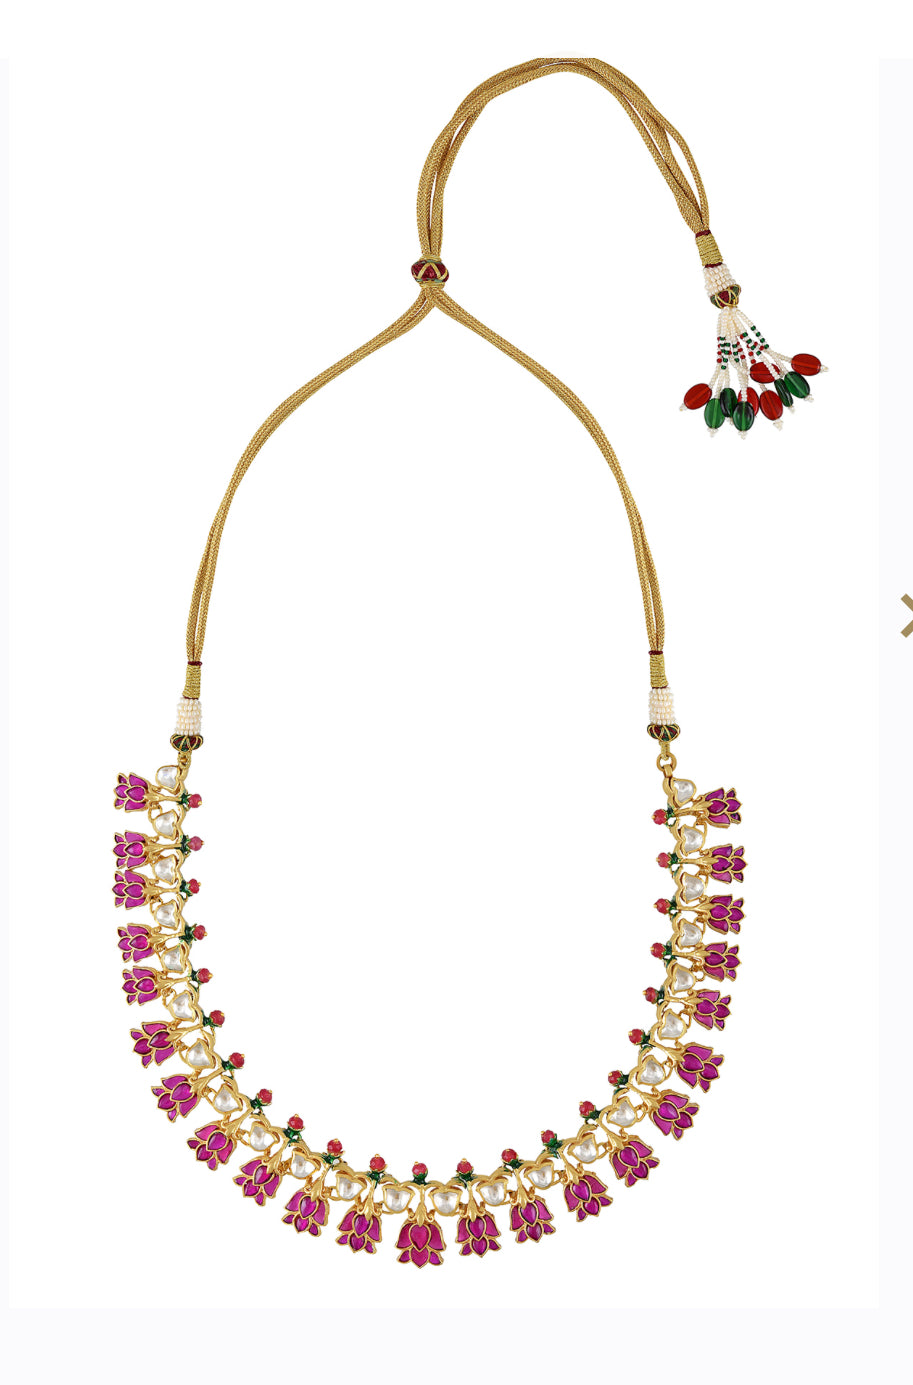 Buy gold plated Lotus necklace set in USA with earrings. Buy beautiful gold plated jewelry, gold plated earrings, silver earrings, silver bangles, bridal jewelry, wedding jewellery from Pure Elegance Indian fashion store in USA.-necklace